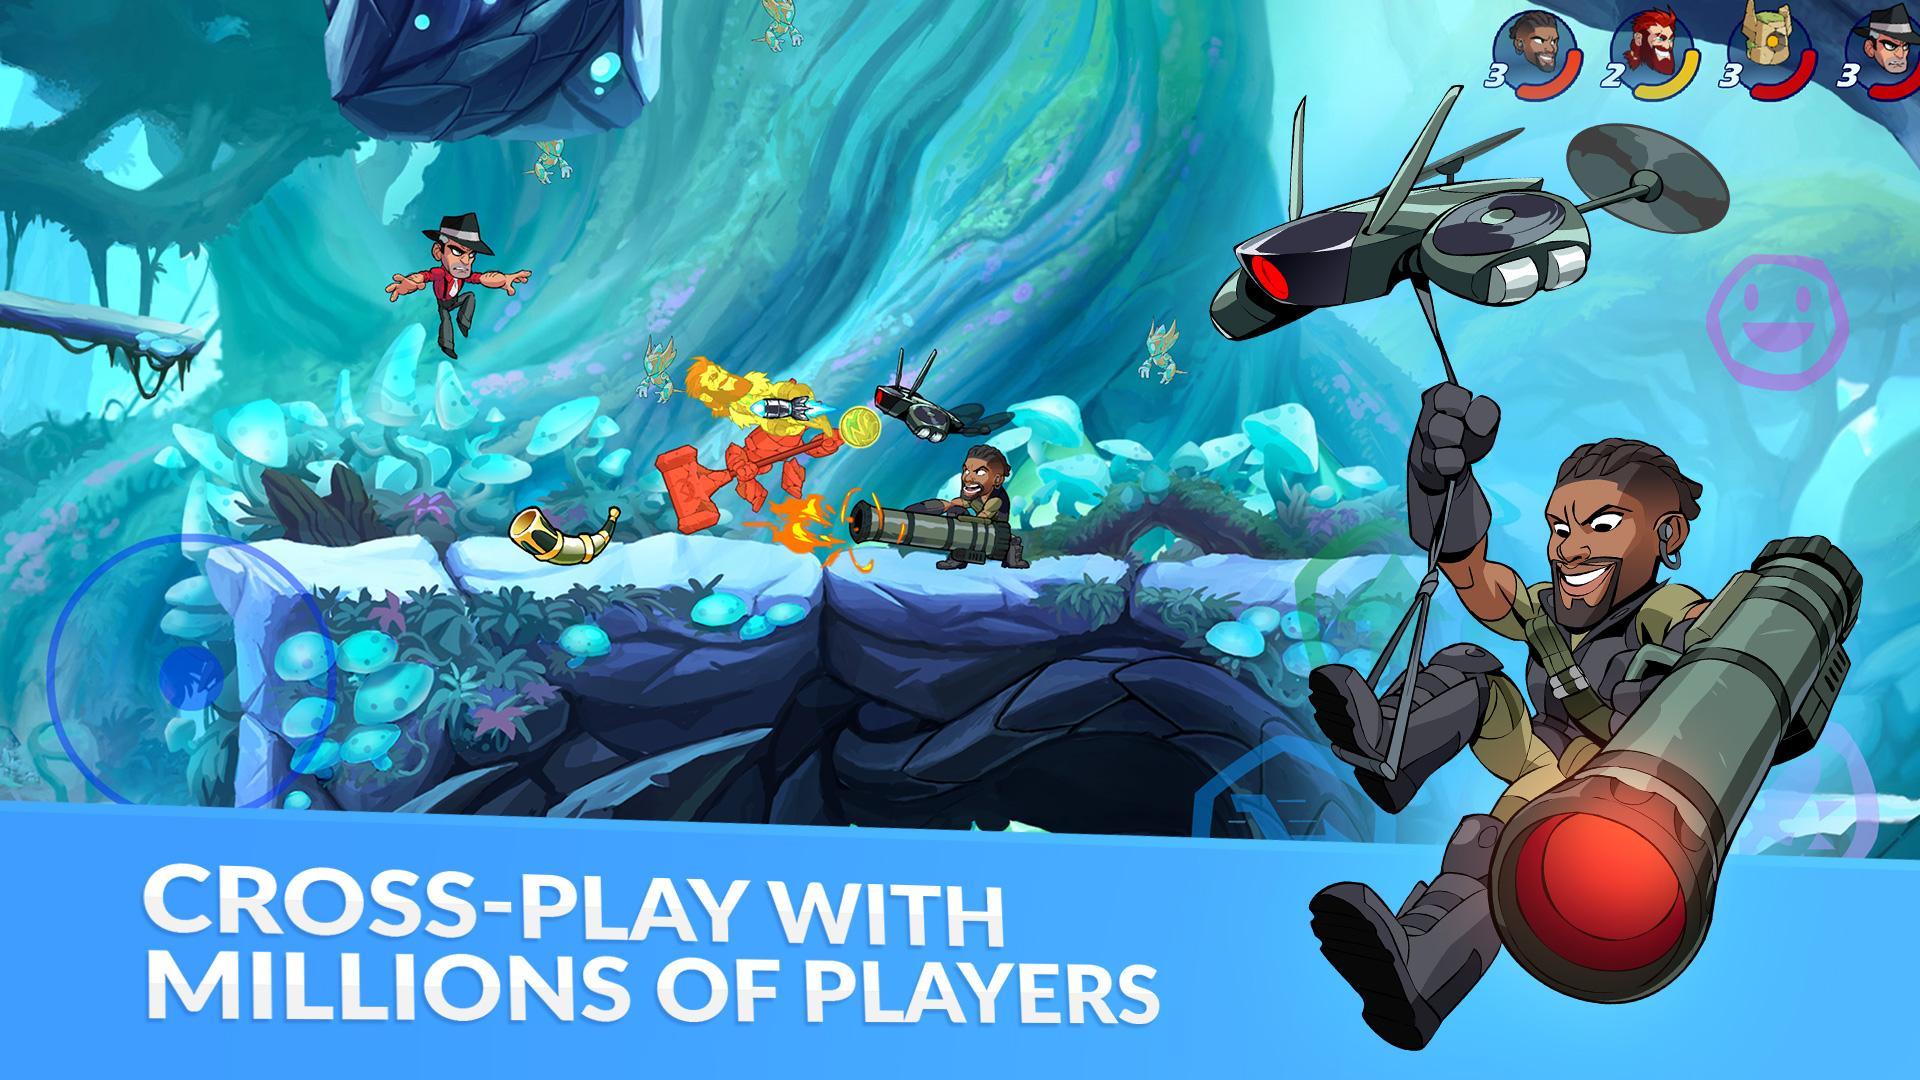 Brawlhalla for Android - APK Download